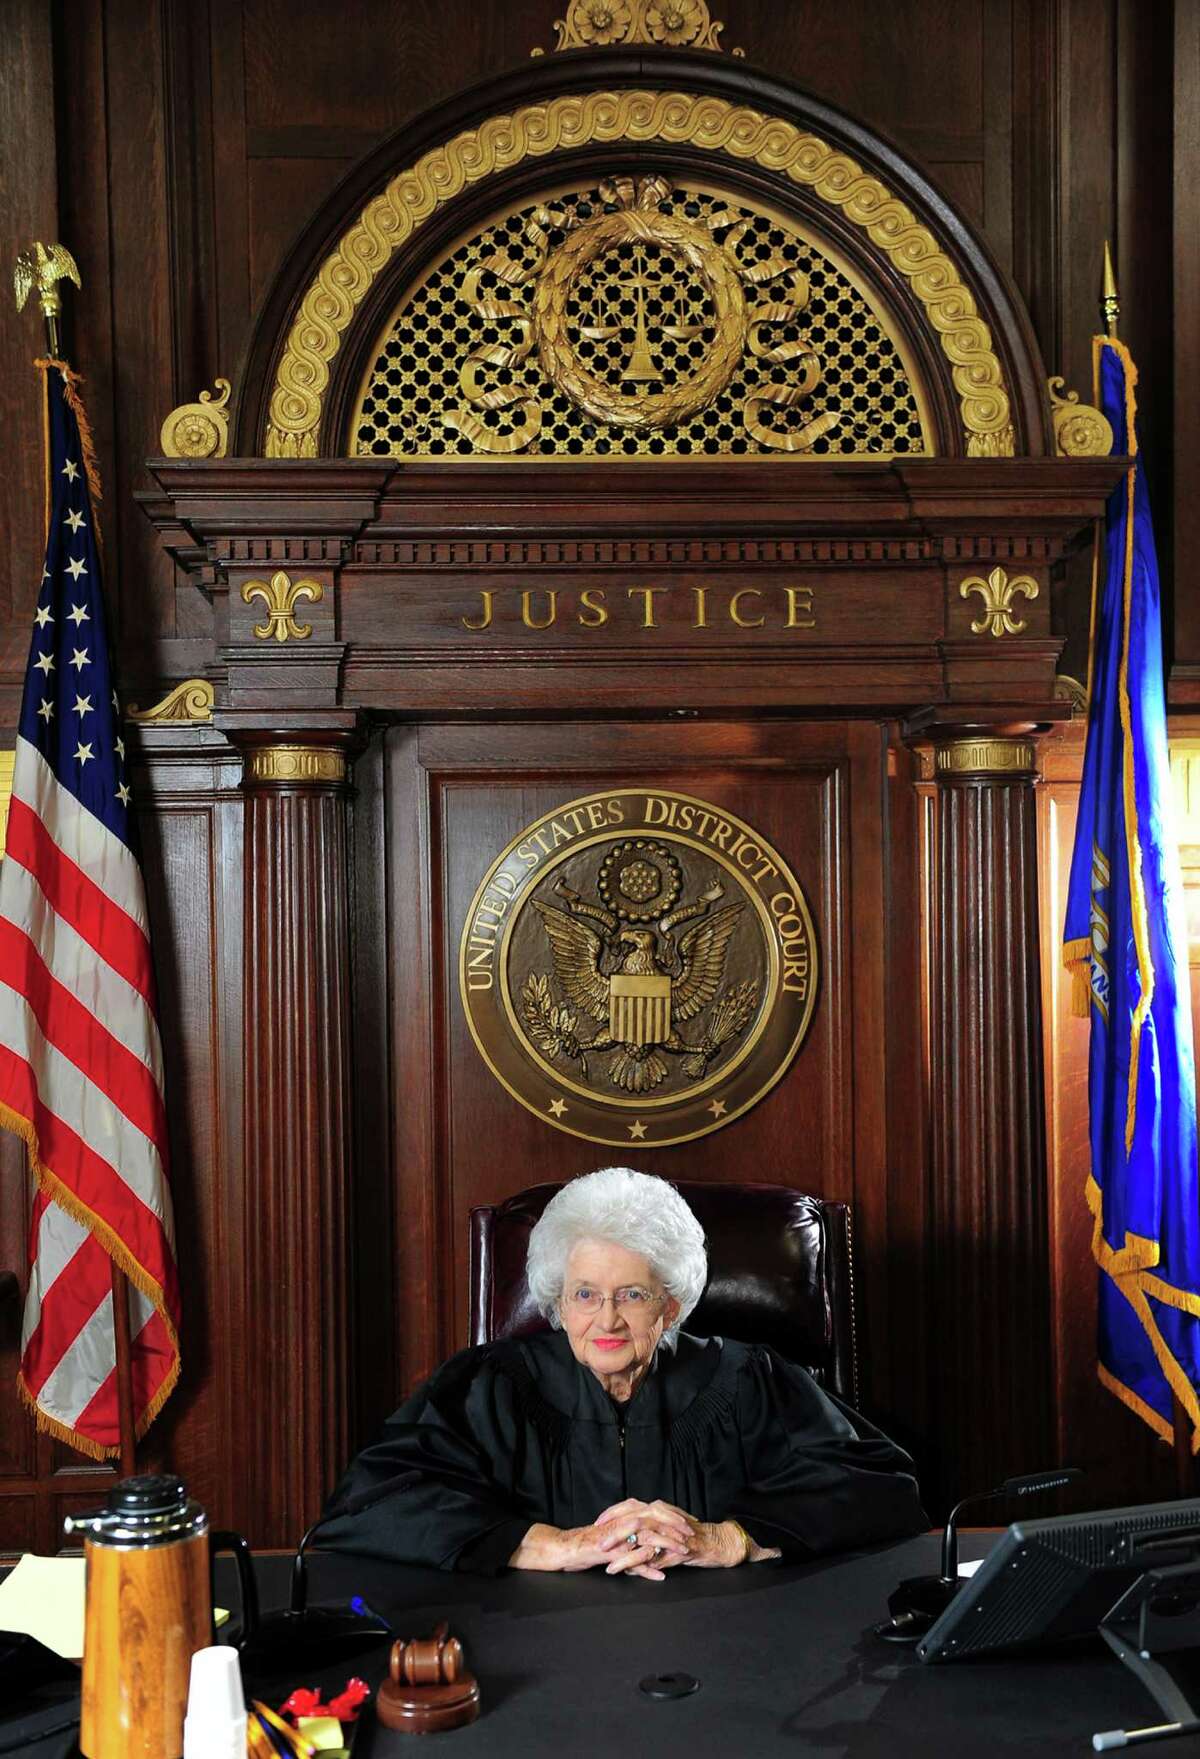 Ellen Bree Burns, a Senior United States federal judge at Federal Courthouse in New Haven, poses for a portrait in her courtroom in New Haven. After almost 40 years on the bench, Burns will be retiring at 91 years old.